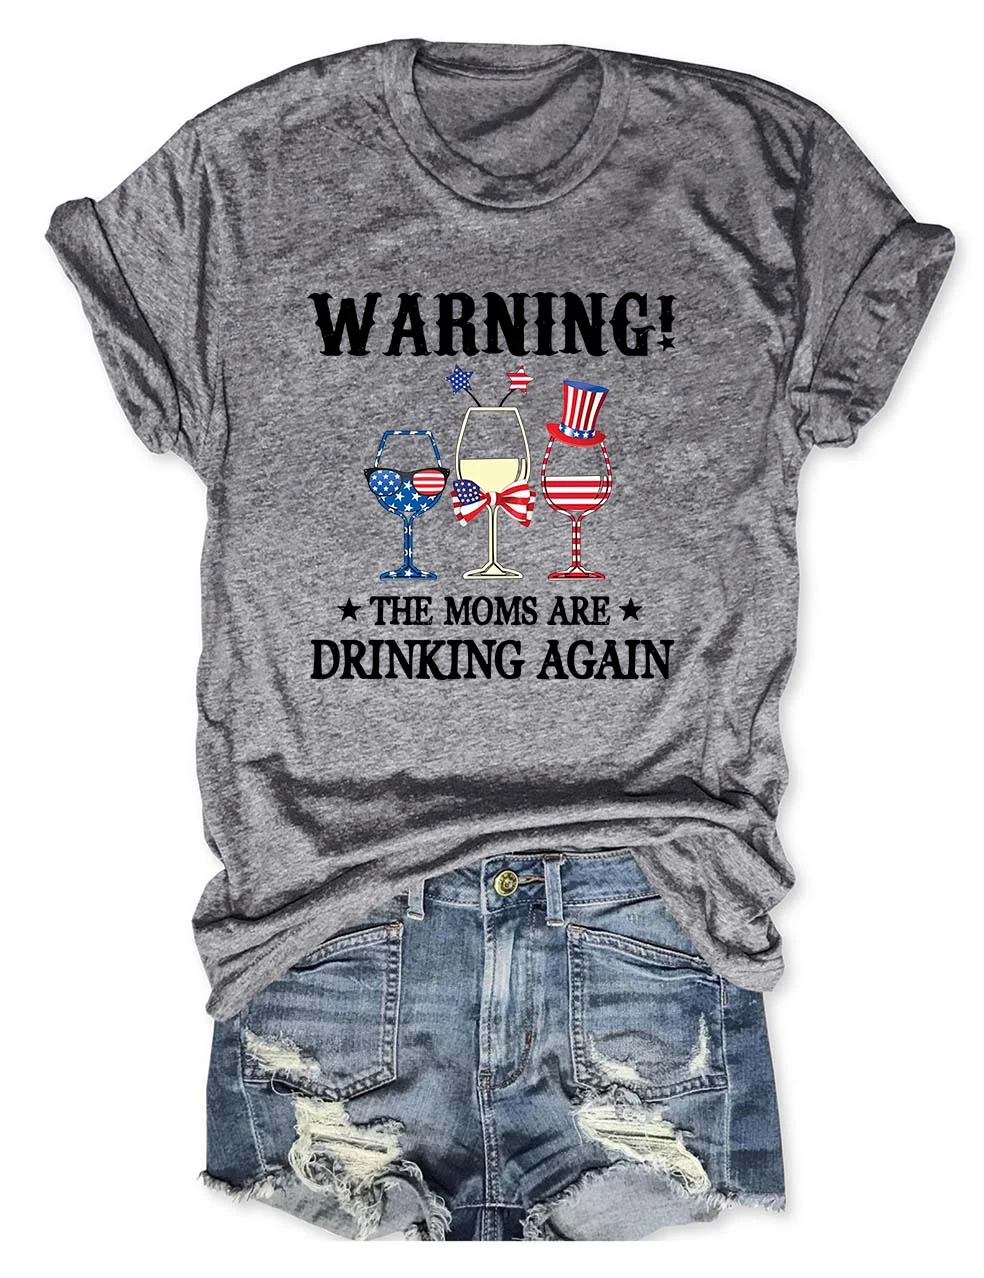 Warning The Moms are Drinking Again T-Shirt